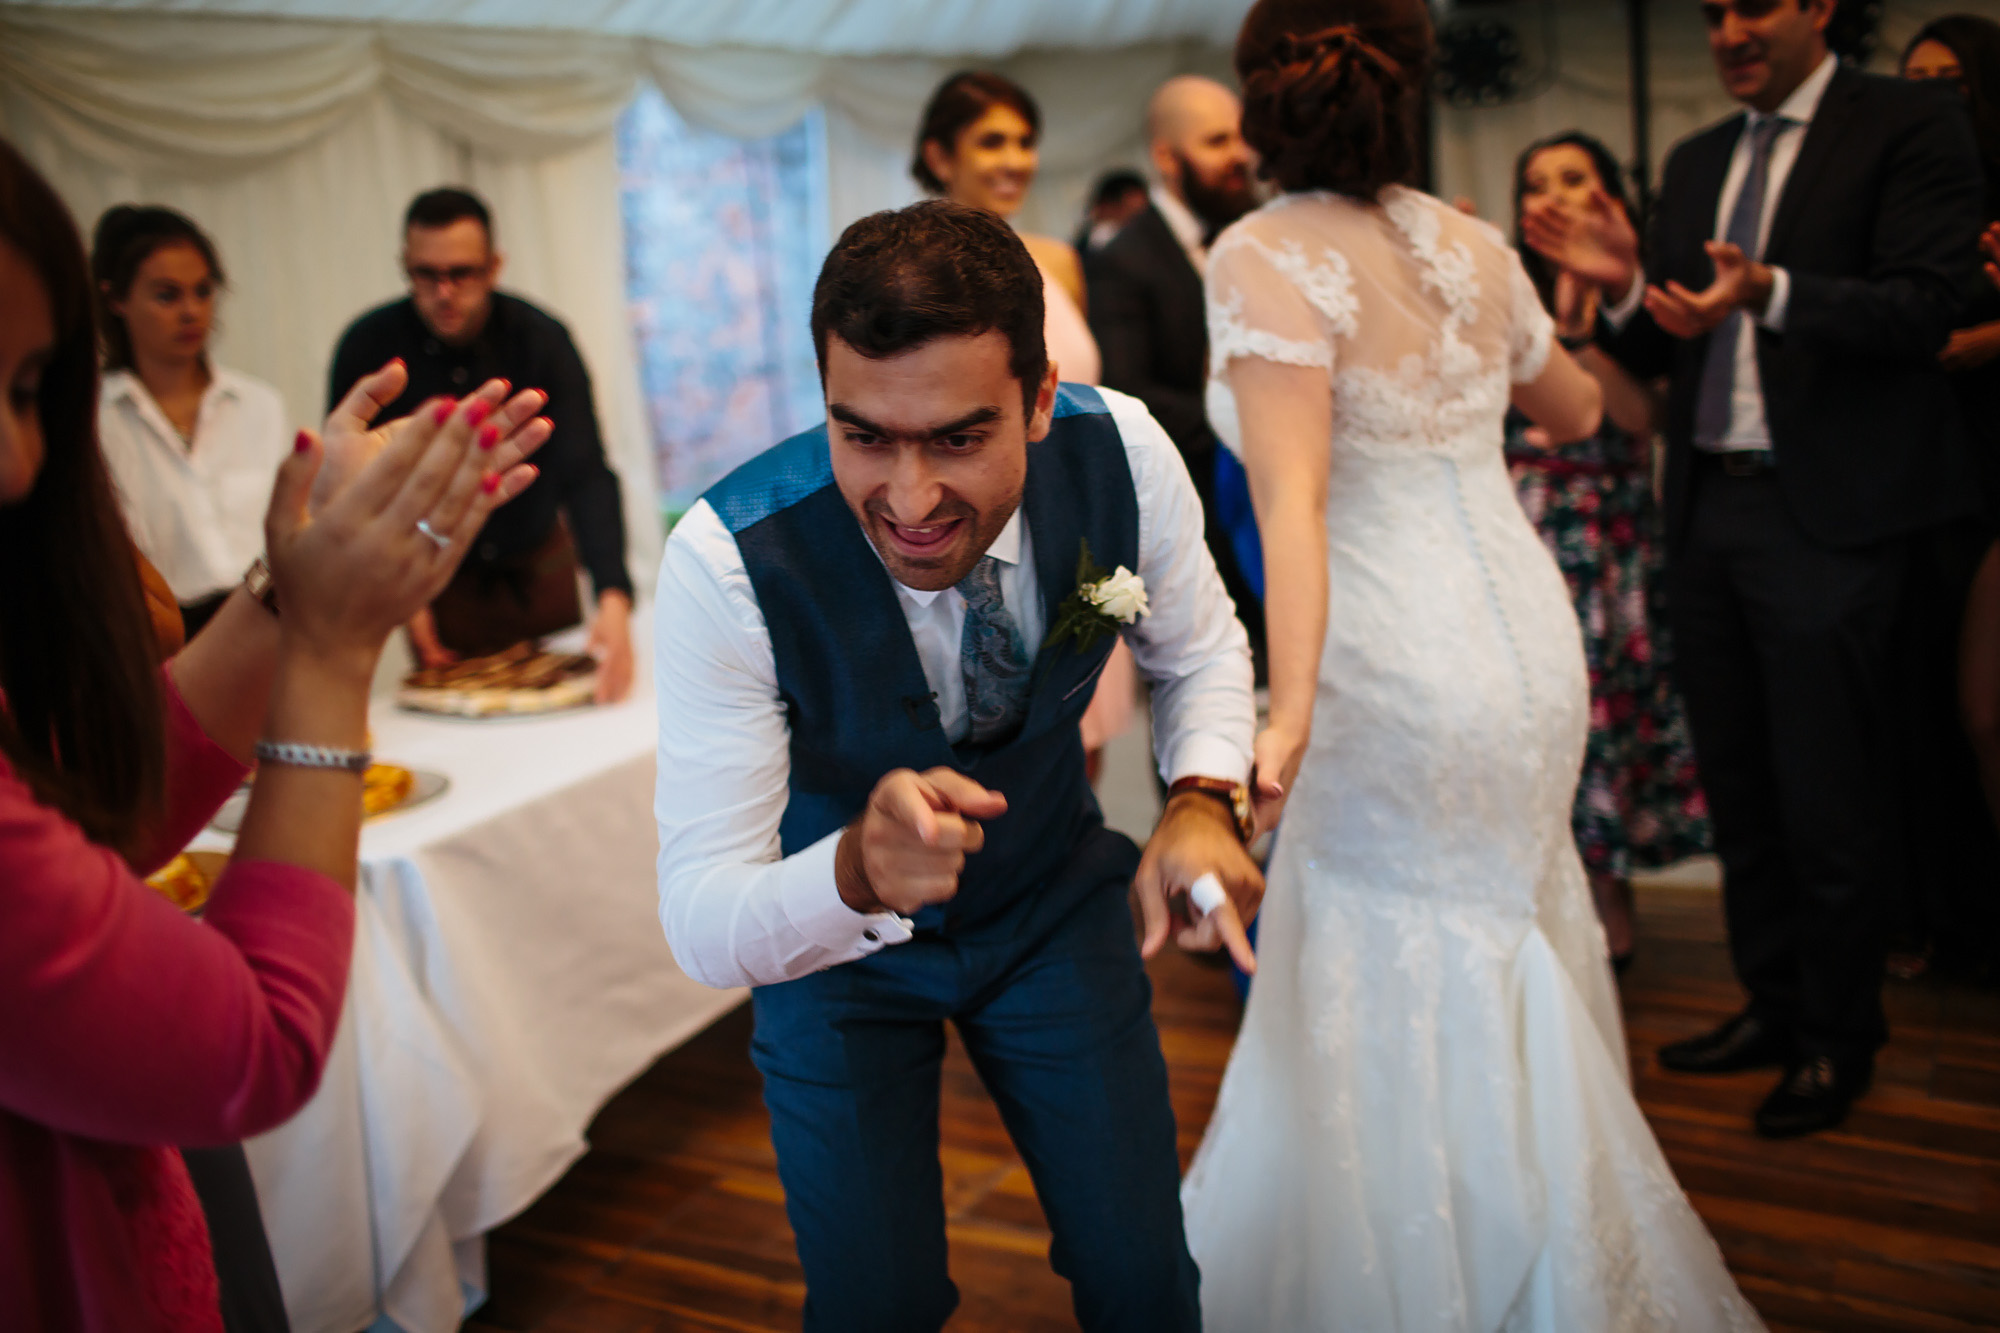 Groom dancing at a wedding with a child